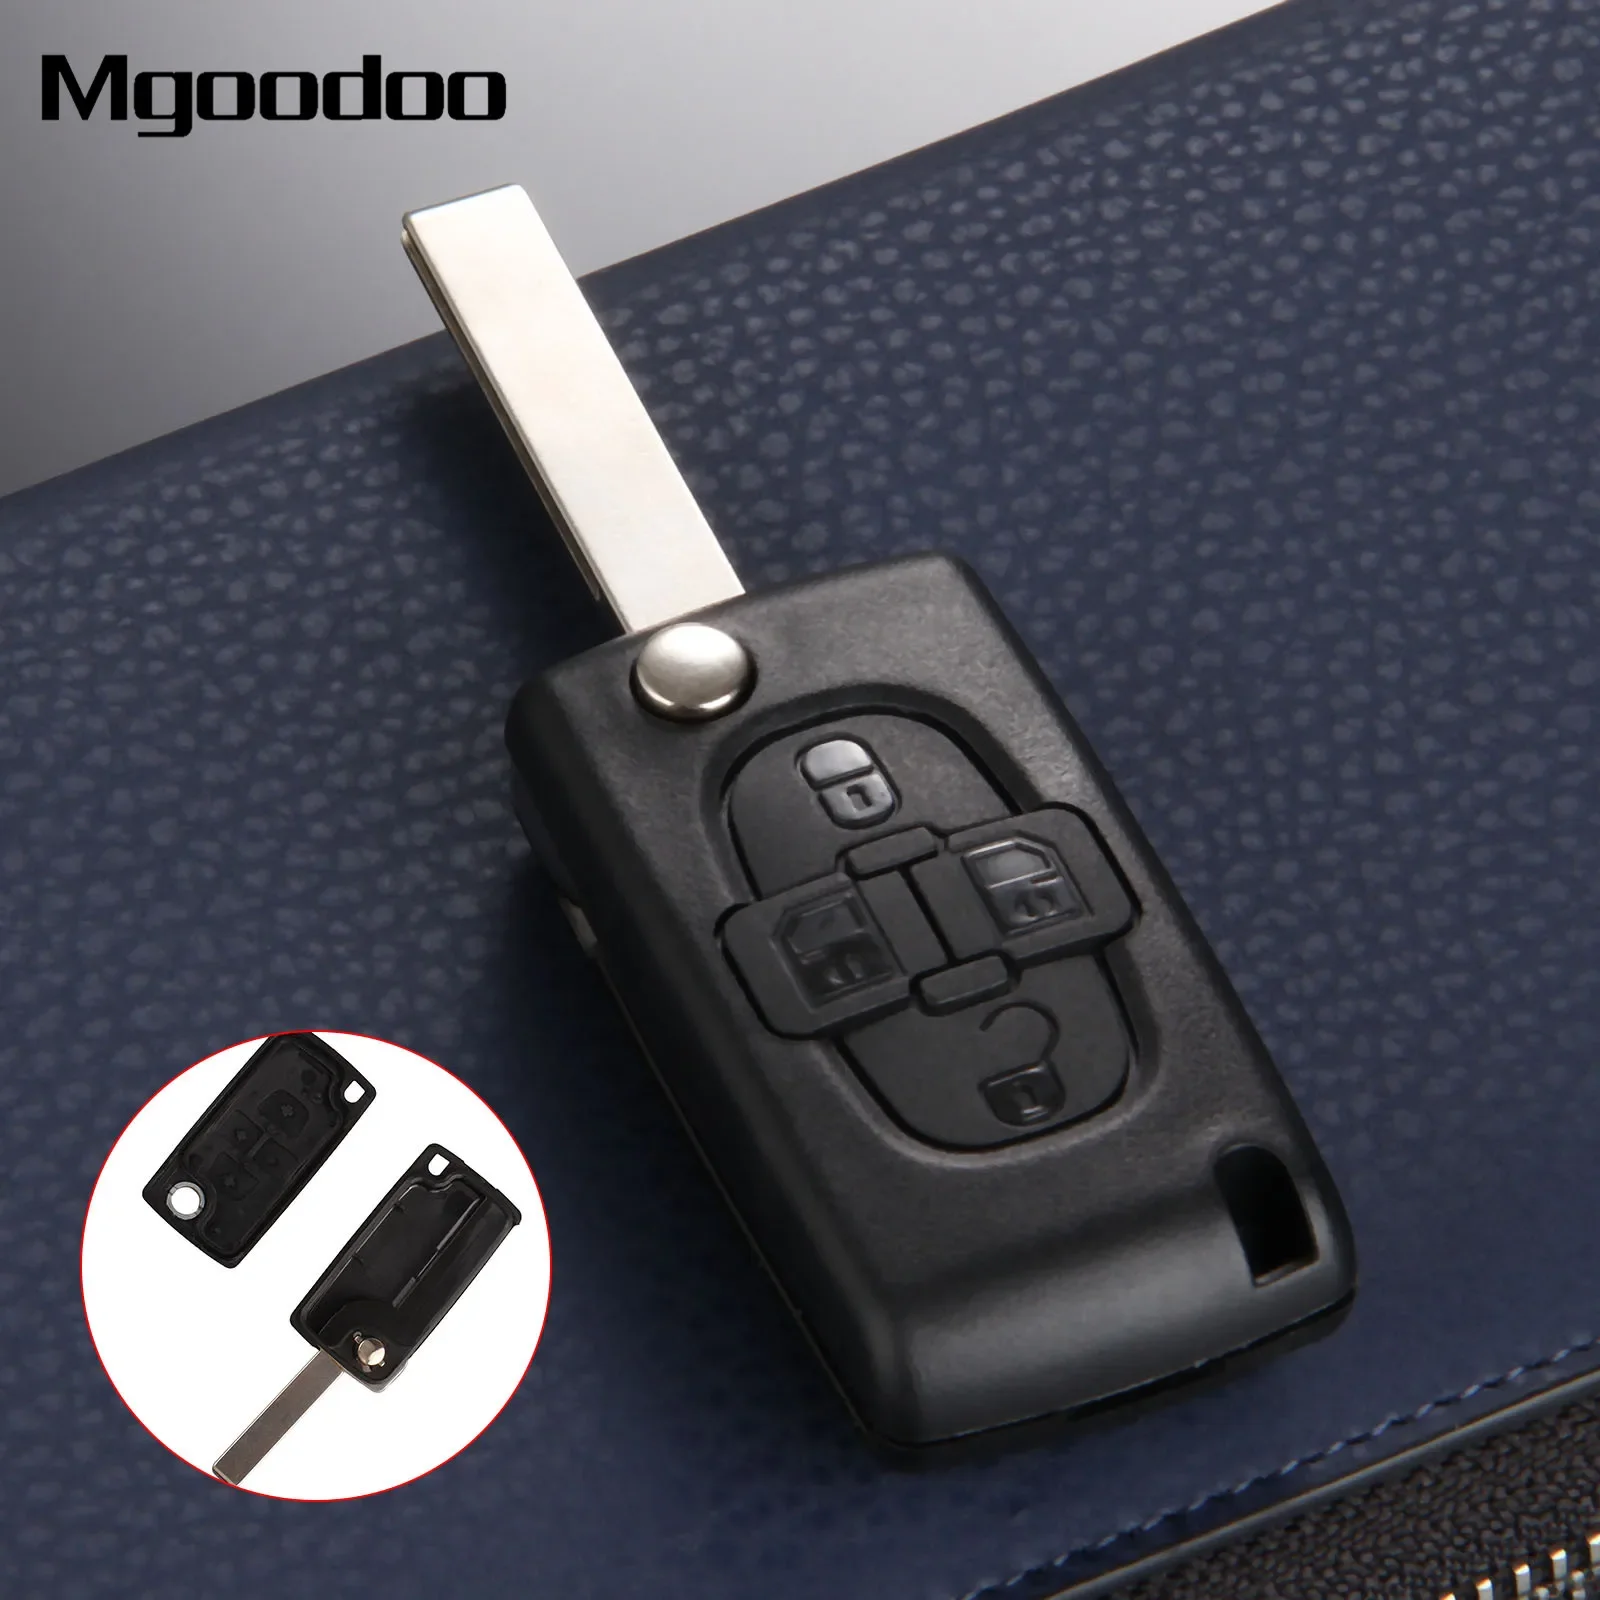 Mgoodoo Replacement Key Shell 4 Buttons Flip Folding Remote Key Case Fob Cover Blank Blade For Peugeot 1007 Citroen C8